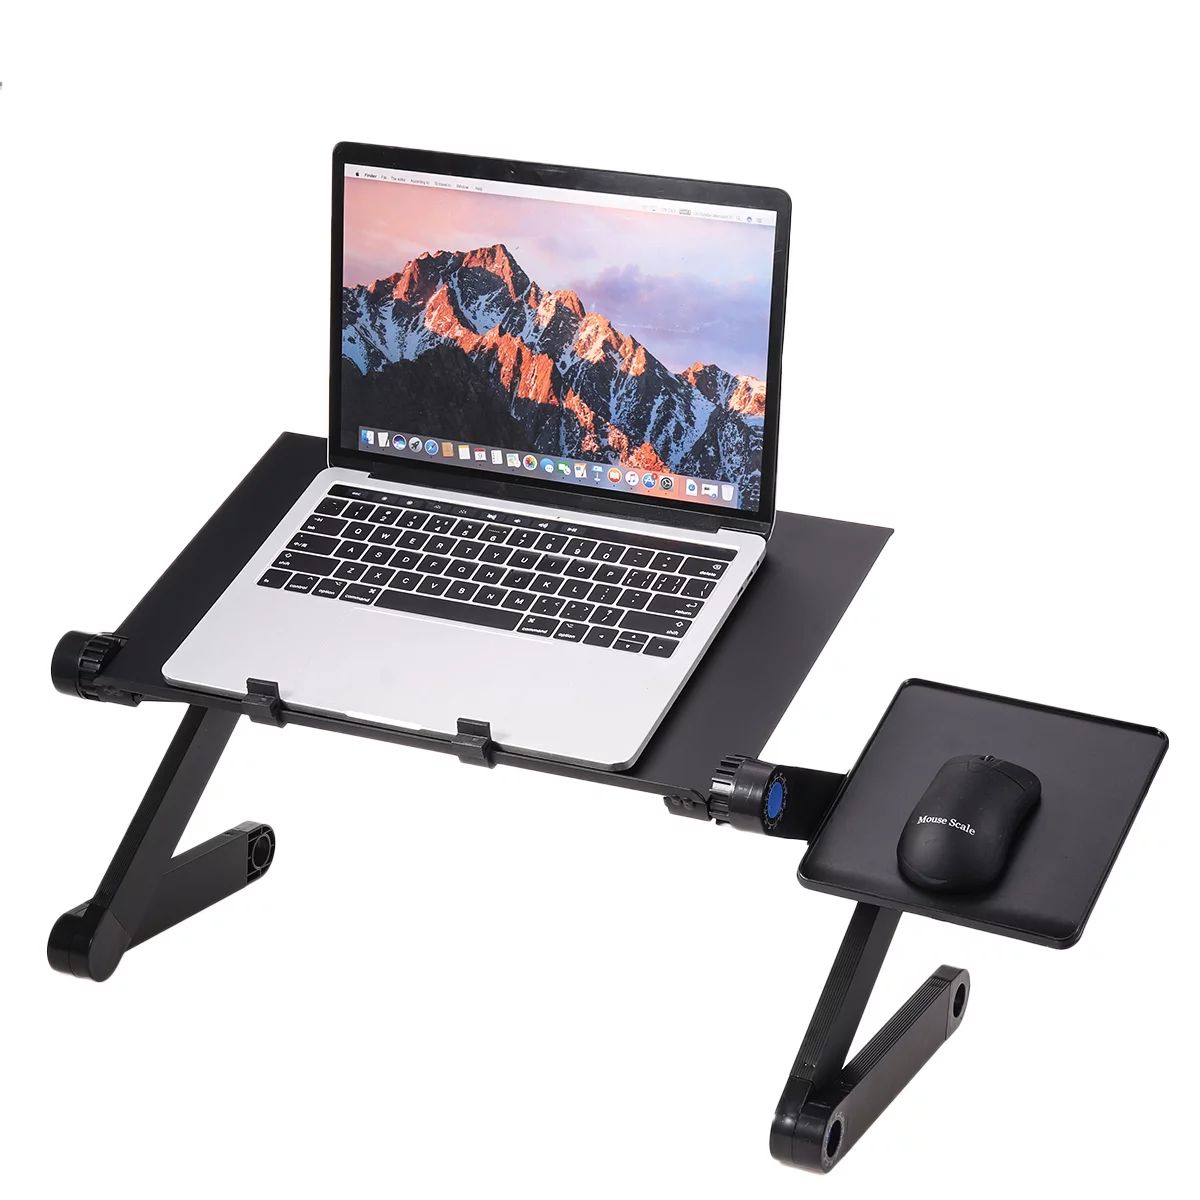 KUDOSALE Adjustable Laptop Cooling Stand & Lap Desk for Bed Couch w/ Mouse Pad Portable Angle Til... | Walmart (US)